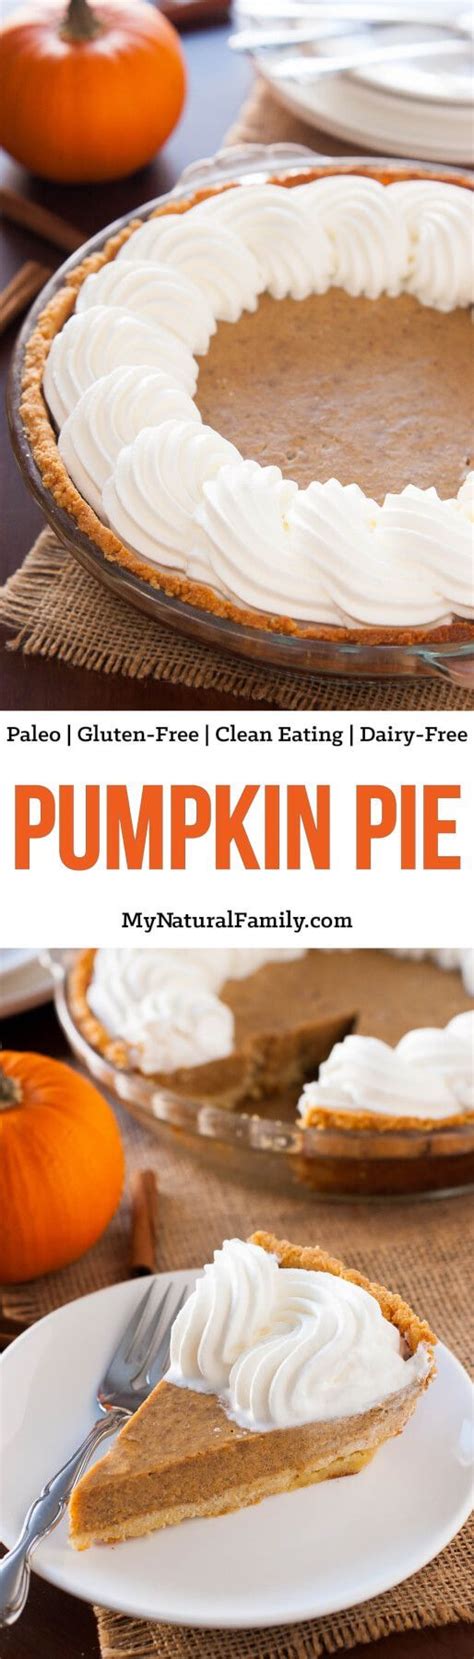 The Crust For This Paleo Pumpkin Pie Is Super Easy To Make And Involves